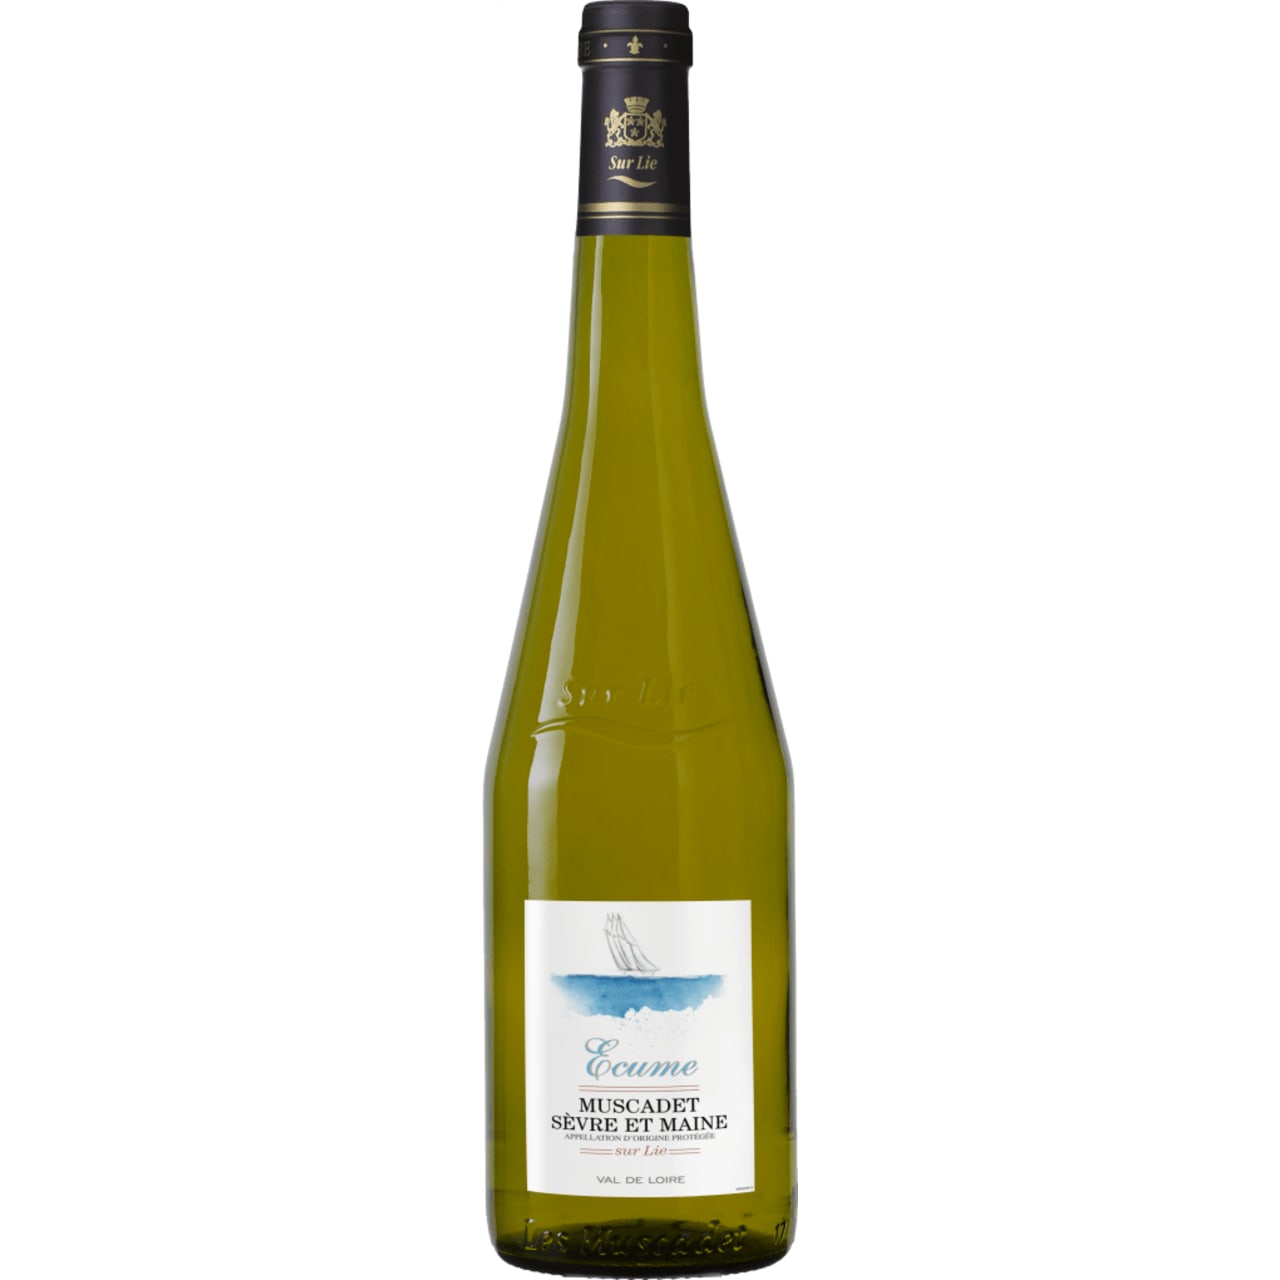 Pale yellow colour with greenish highlights and an intense floral bouquet with overtones of spice and fruit.